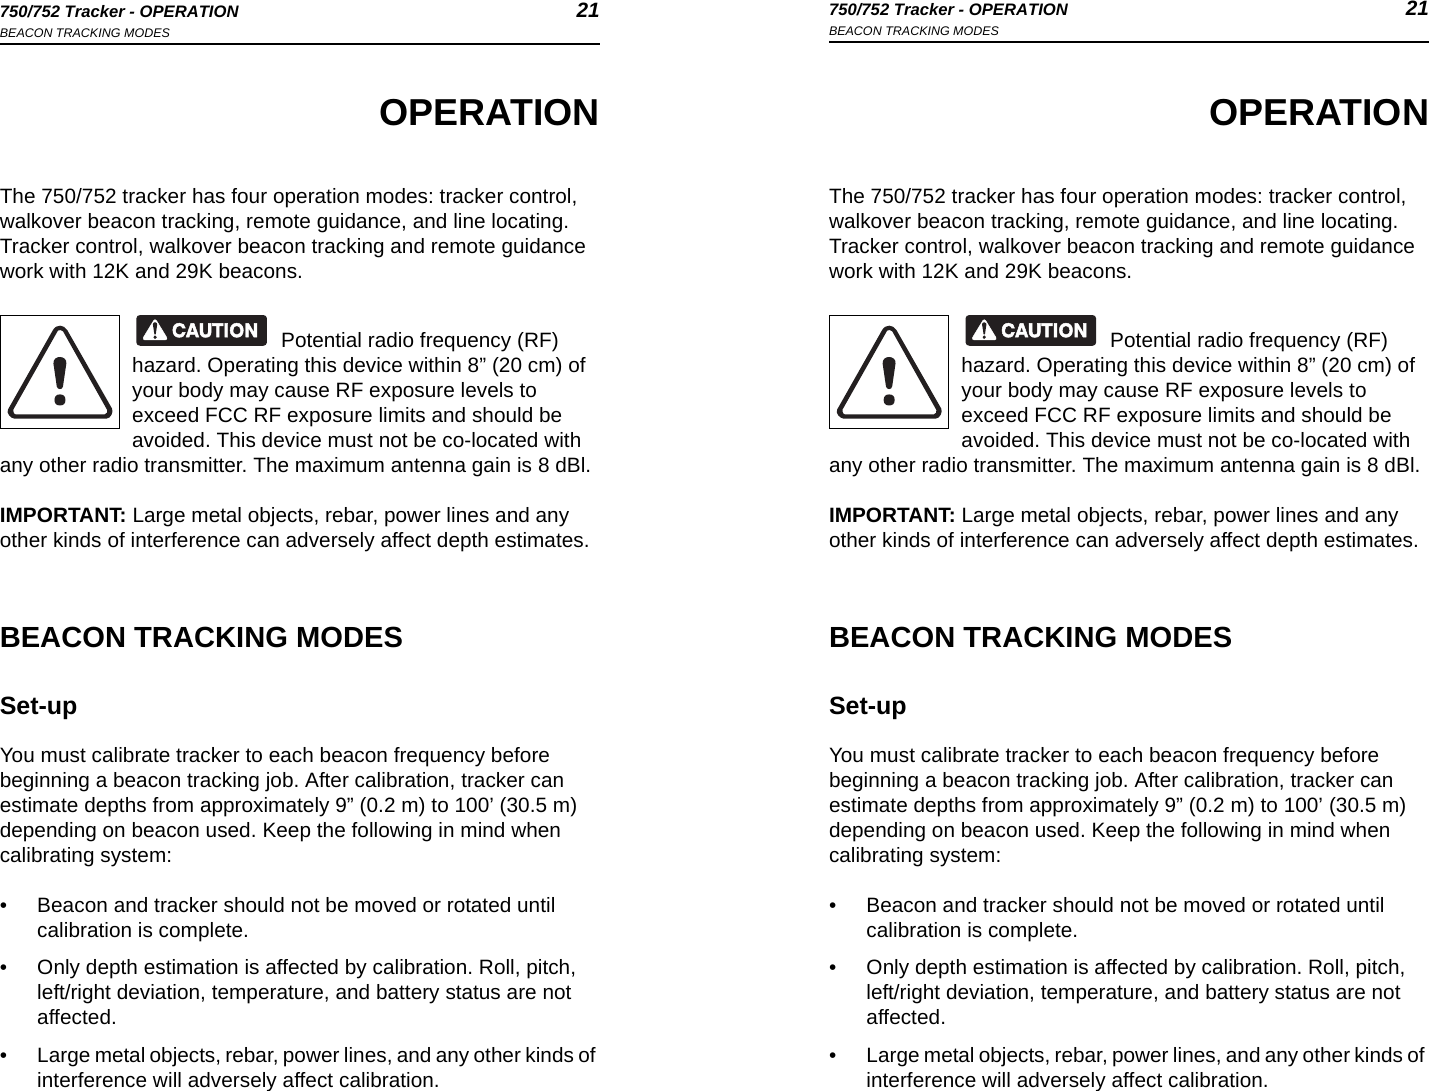 750/752 Tracker - OPERATION 21BEACON TRACKING MODES750/752 Tracker - OPERATION 21BEACON TRACKING MODESOPERATIONThe 750/752 tracker has four operation modes: tracker control, walkover beacon tracking, remote guidance, and line locating. Tracker control, walkover beacon tracking and remote guidance work with 12K and 29K beacons.Potential radio frequency (RF) hazard. Operating this device within 8” (20 cm) of your body may cause RF exposure levels to exceed FCC RF exposure limits and should be avoided. This device must not be co-located with any other radio transmitter. The maximum antenna gain is 8 dBl.IMPORTANT: Large metal objects, rebar, power lines and any other kinds of interference can adversely affect depth estimates.BEACON TRACKING MODESSet-upYou must calibrate tracker to each beacon frequency before beginning a beacon tracking job. After calibration, tracker can estimate depths from approximately 9” (0.2 m) to 100’ (30.5 m) depending on beacon used. Keep the following in mind when calibrating system:• Beacon and tracker should not be moved or rotated until calibration is complete.• Only depth estimation is affected by calibration. Roll, pitch, left/right deviation, temperature, and battery status are not affected.• Large metal objects, rebar, power lines, and any other kinds of interference will adversely affect calibration.OPERATIONThe 750/752 tracker has four operation modes: tracker control, walkover beacon tracking, remote guidance, and line locating. Tracker control, walkover beacon tracking and remote guidance work with 12K and 29K beacons.Potential radio frequency (RF) hazard. Operating this device within 8” (20 cm) of your body may cause RF exposure levels to exceed FCC RF exposure limits and should be avoided. This device must not be co-located with any other radio transmitter. The maximum antenna gain is 8 dBl.IMPORTANT: Large metal objects, rebar, power lines and any other kinds of interference can adversely affect depth estimates.BEACON TRACKING MODESSet-upYou must calibrate tracker to each beacon frequency before beginning a beacon tracking job. After calibration, tracker can estimate depths from approximately 9” (0.2 m) to 100’ (30.5 m) depending on beacon used. Keep the following in mind when calibrating system:• Beacon and tracker should not be moved or rotated until calibration is complete.• Only depth estimation is affected by calibration. Roll, pitch, left/right deviation, temperature, and battery status are not affected.• Large metal objects, rebar, power lines, and any other kinds of interference will adversely affect calibration.